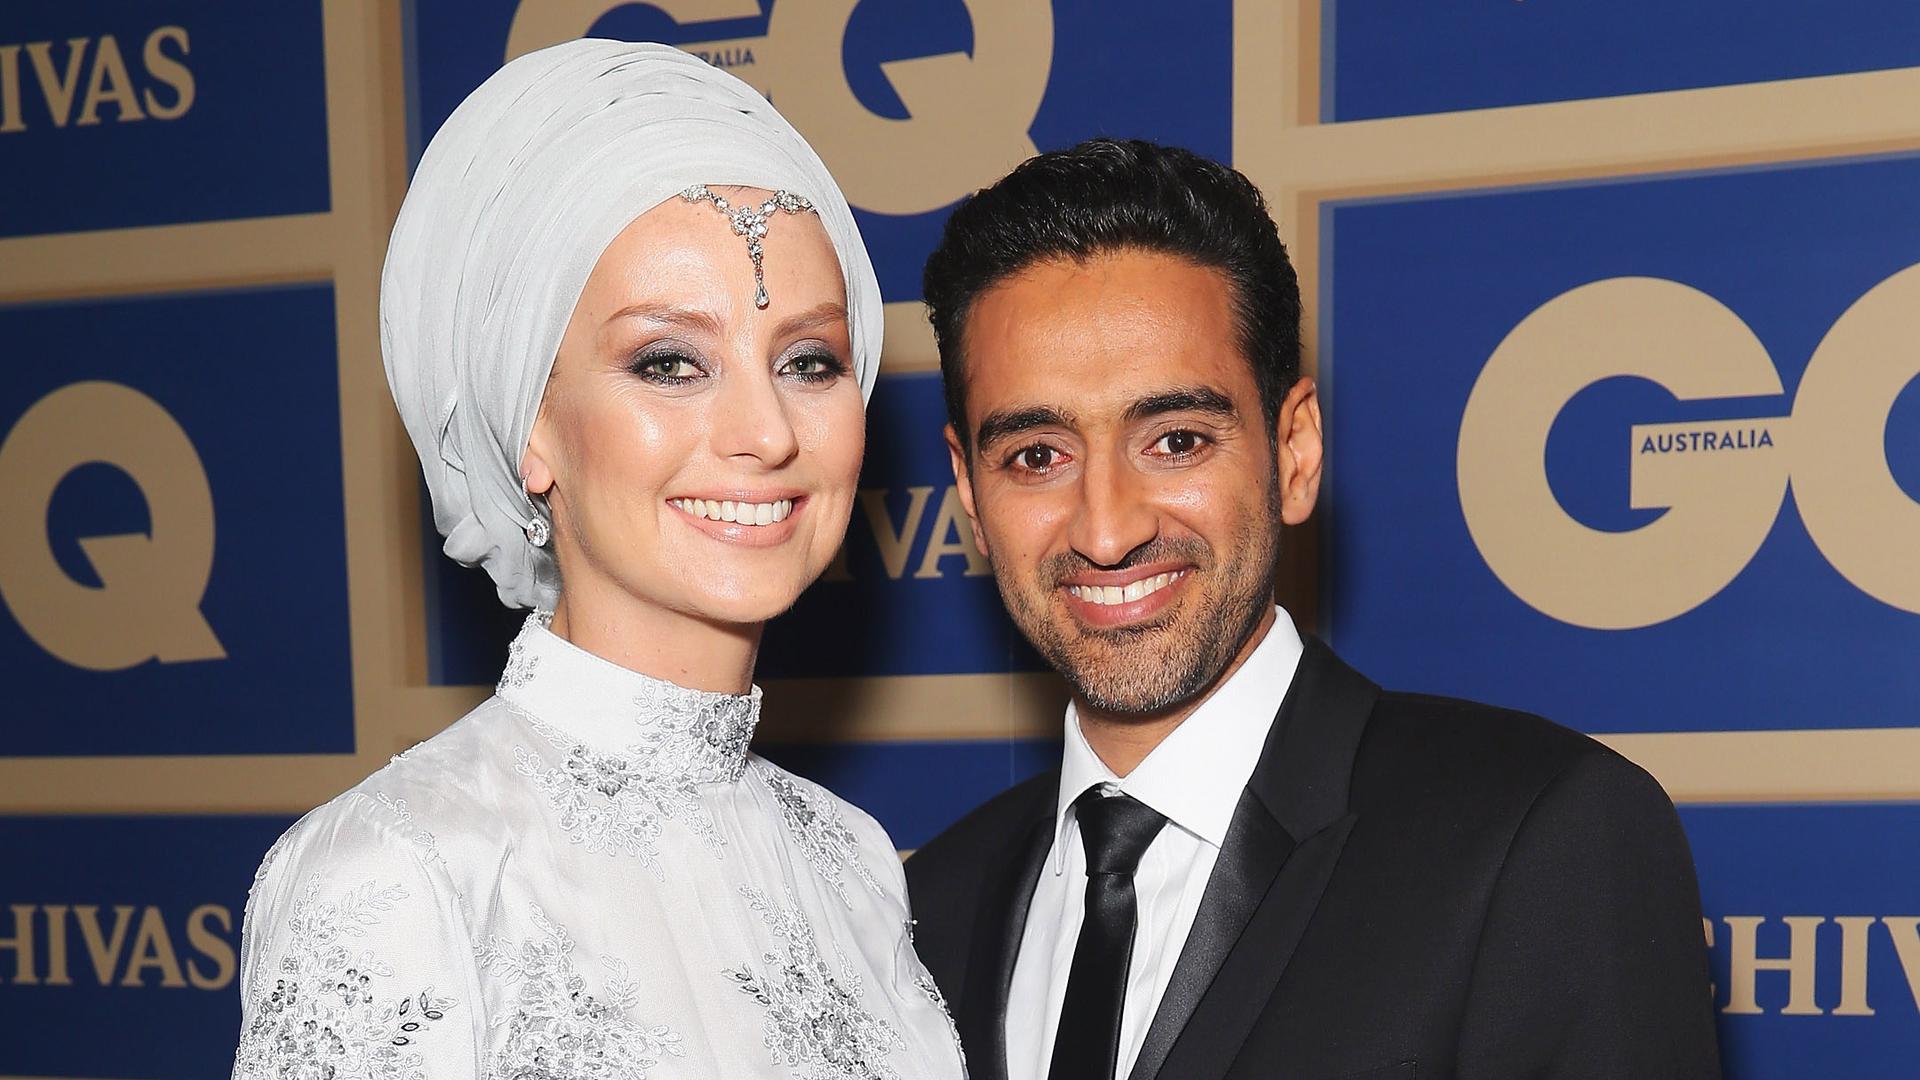 Susan Carland and Waleed Ali arrive ahead of the 2015 GQ Men Of The Year Awards on November 10, 2015 in Sydney, Australia.